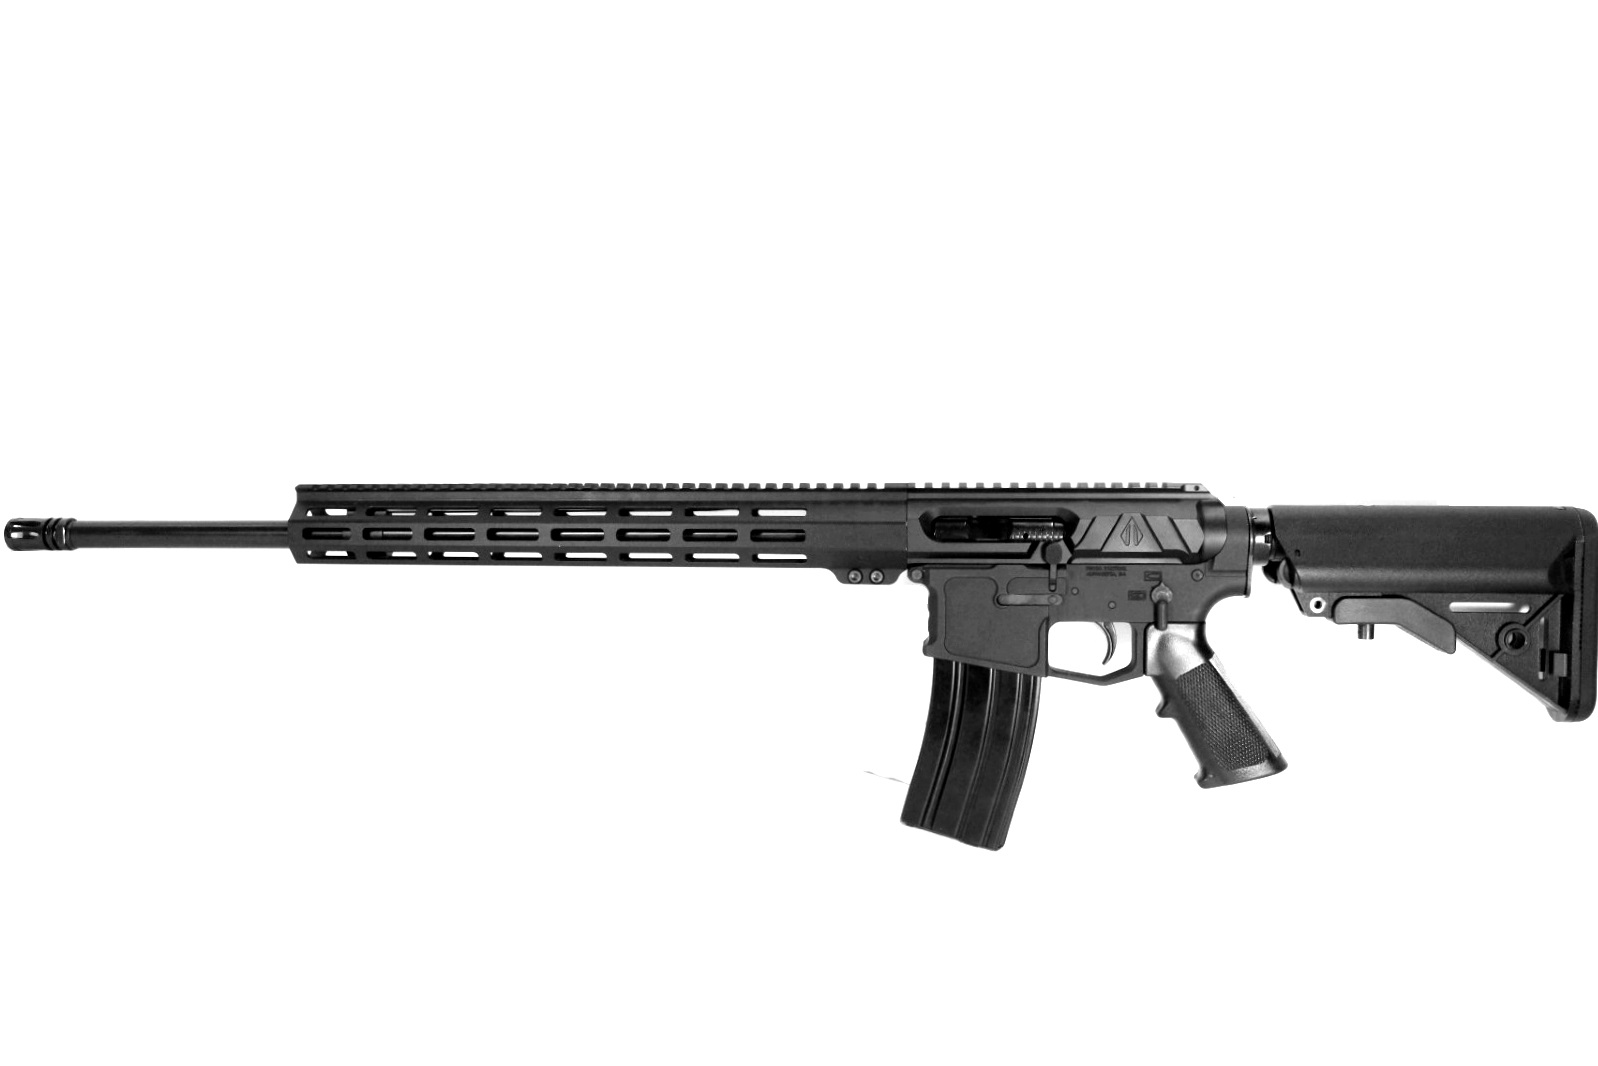 Pro2A Tactical's Valiant Left Handed 22 inch AR-15 224 Valkyrie M-LOK Complete Side Charging Rifle